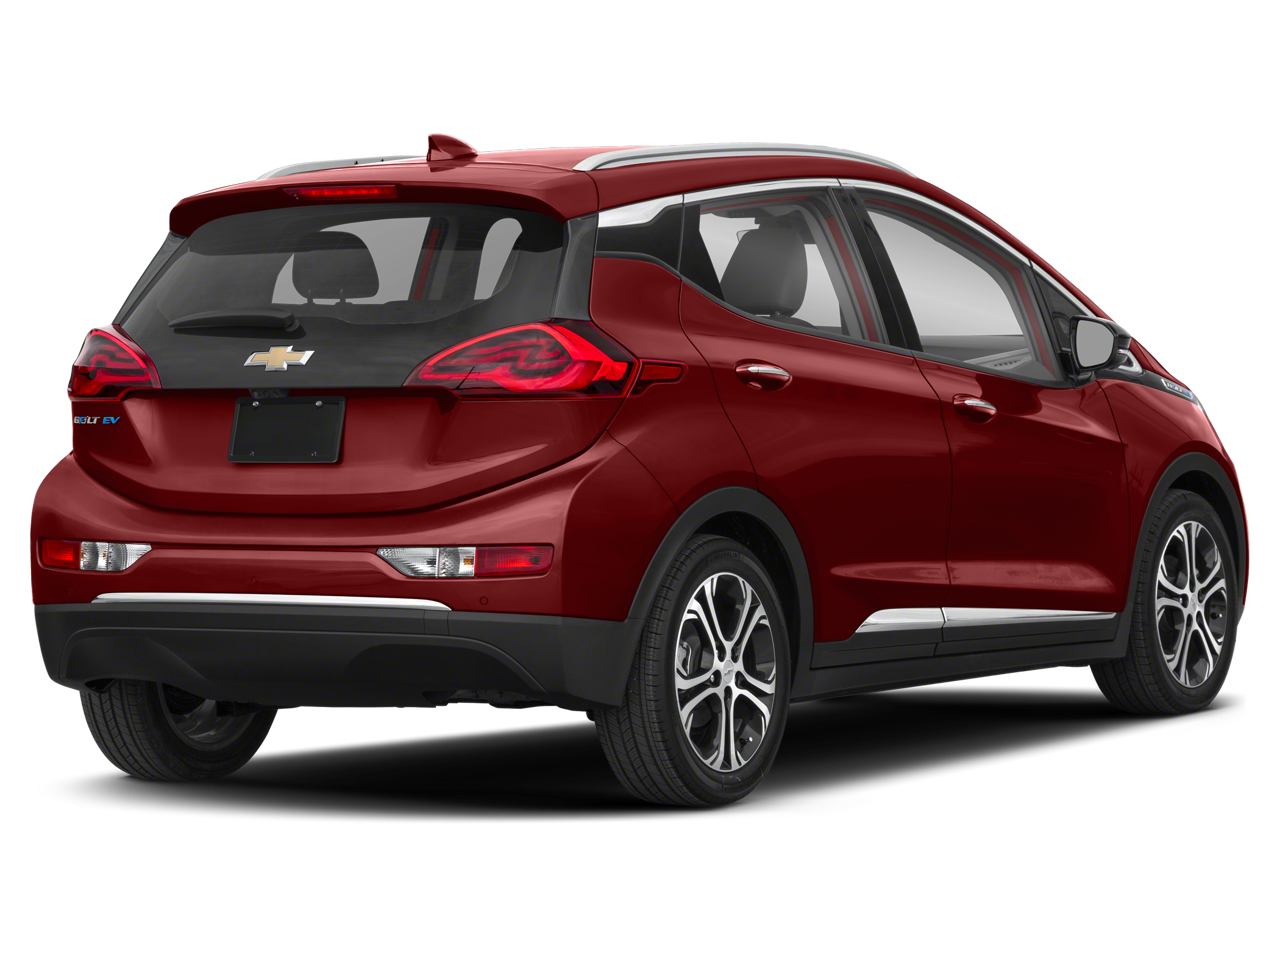 Used 2021 Chevrolet Bolt EV Premier with VIN 1G1FZ6S07M4100636 for sale in Upland, CA